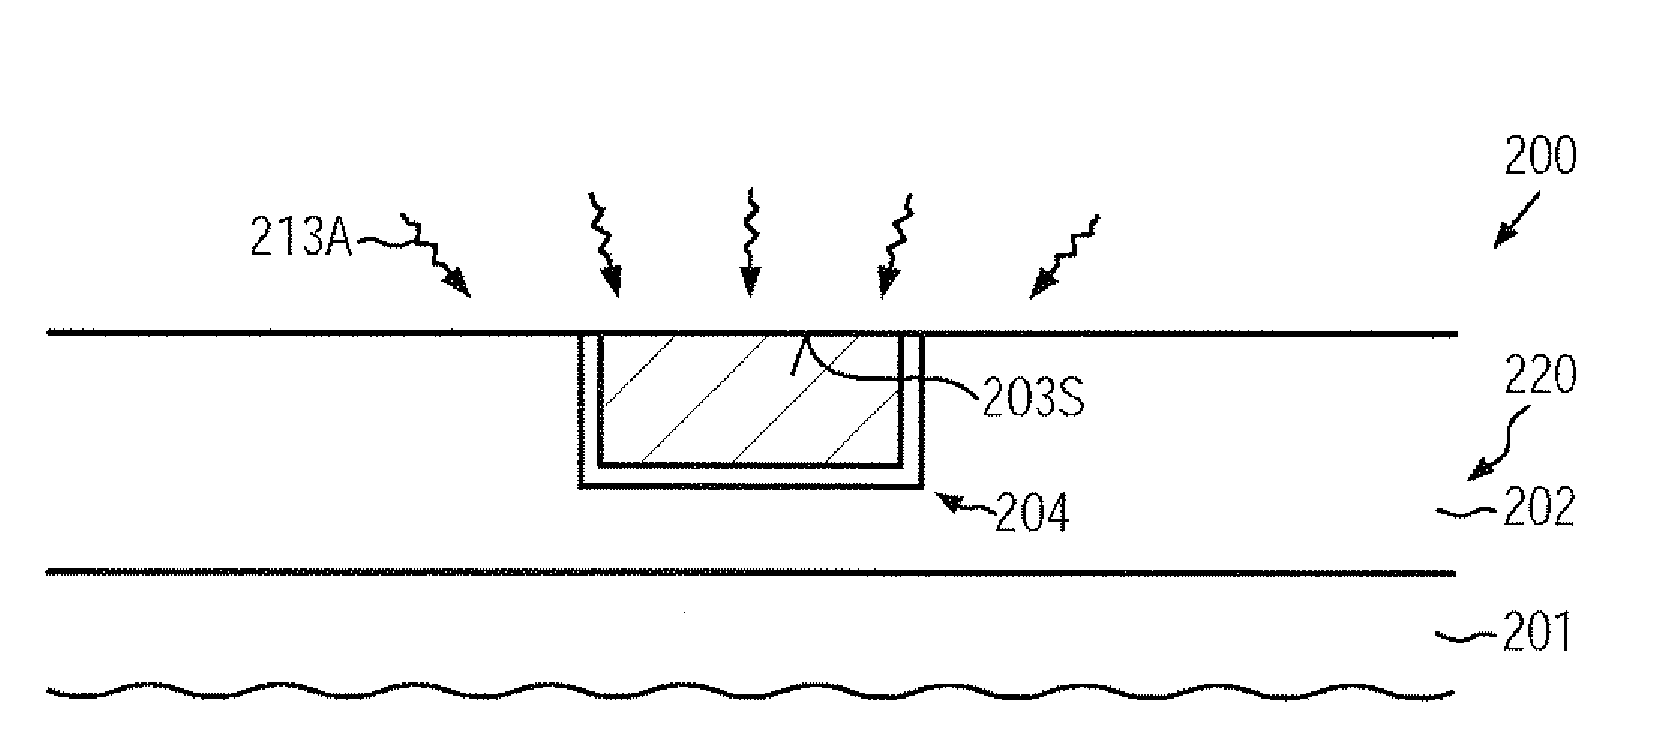 Method for passivating exposed copper surfaces in a metallization layer of a semiconductor device